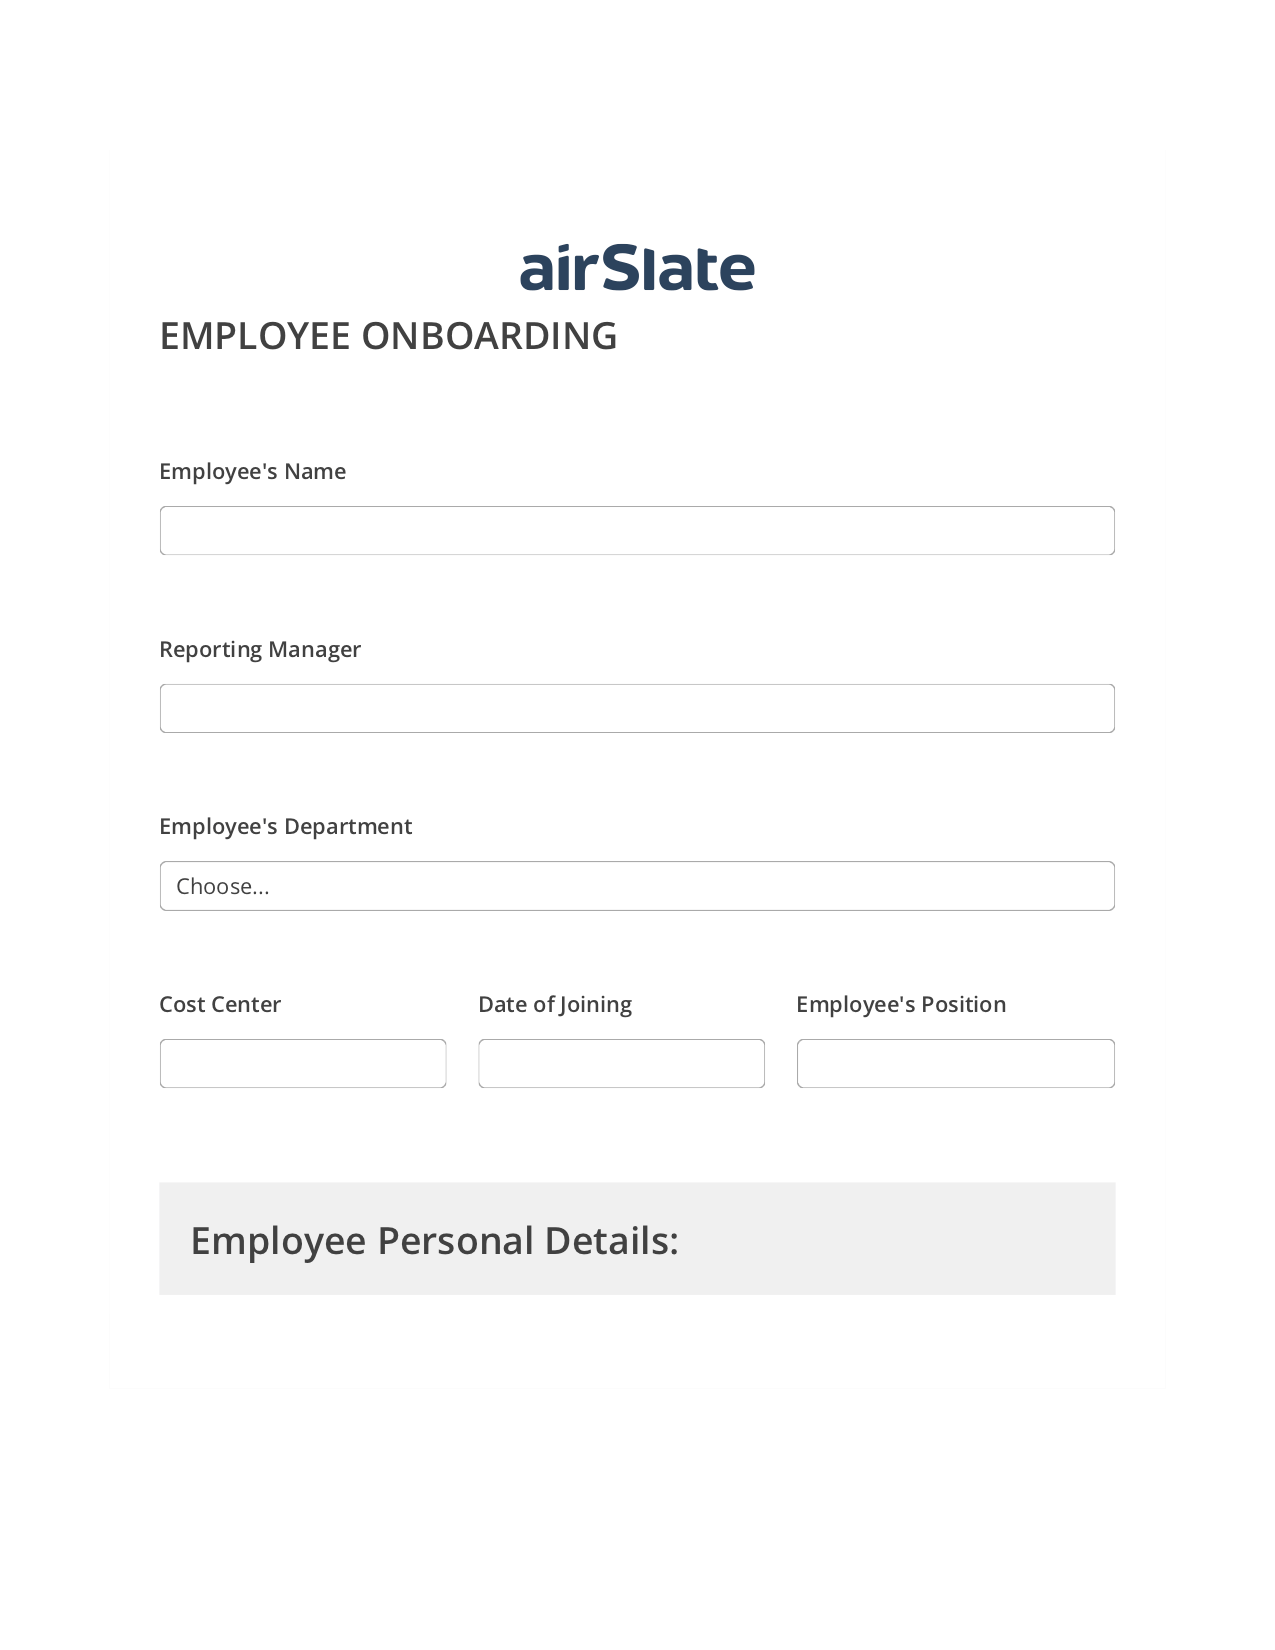 Multirole Employee Onboarding Workflow Prefill from NetSuite records, Invoke Salesforce Process Bot, Export to Excel 365 Bot